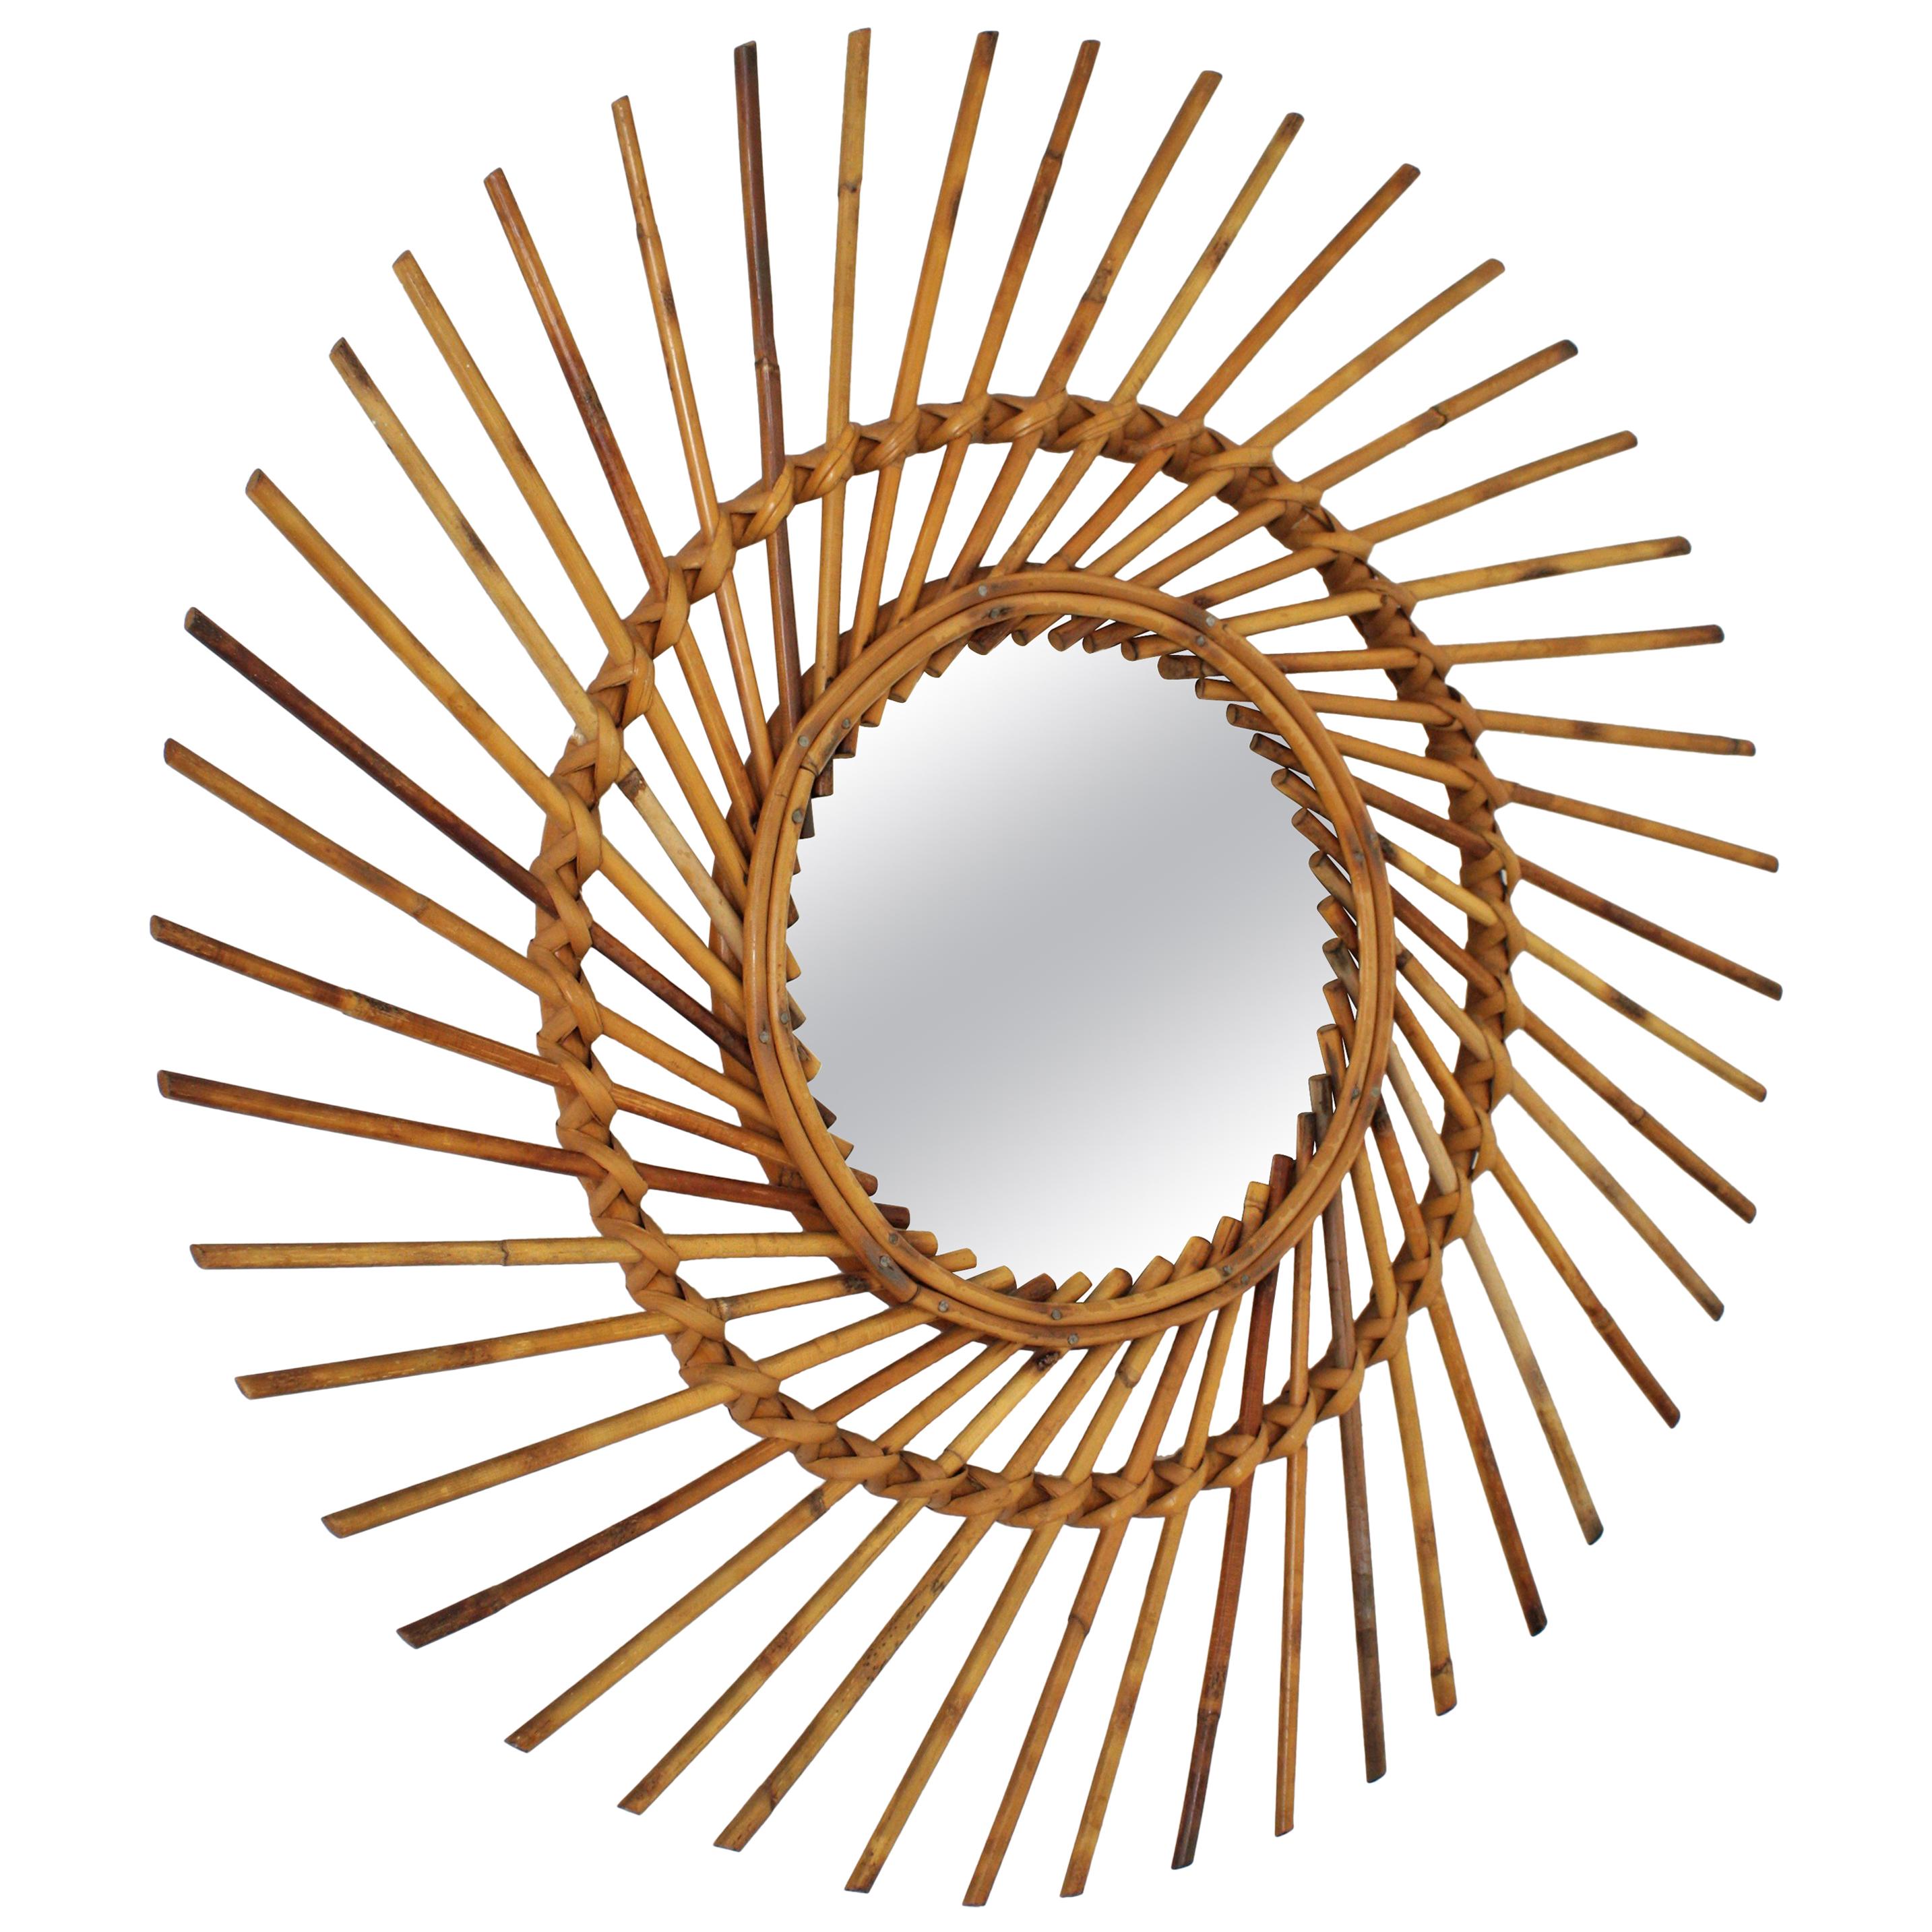 Midcentury sunburst mirror handcrafted in rattan. Spain, 1960s.
This handcrafted sunburst mirror has a design with pinwheel shape. It has all the taste of the Mediterrean coast style and it will be a nice addition to any beach house or countryside